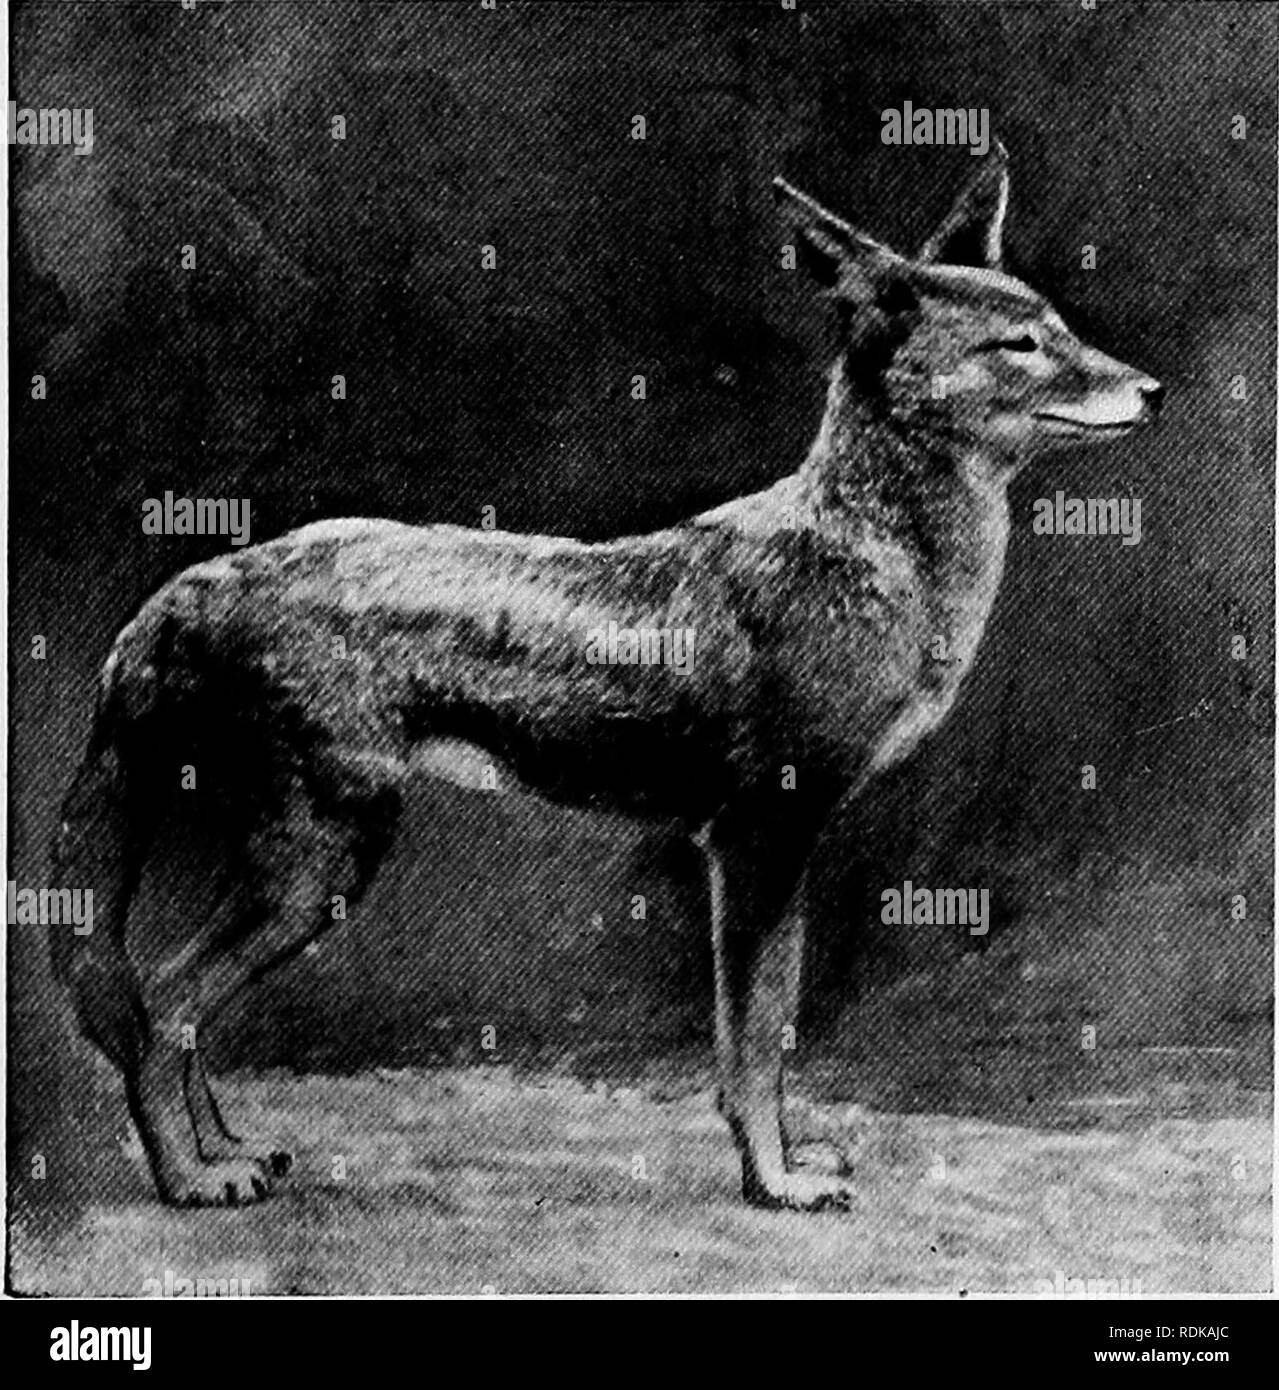 Mammals of other lands;. Mammals. [Ncrth Finchlt) Photo h) L. Midland,  .] TURKISH JACKAL This yackal is common in both Turkey in Europe and  in Asia. Ne^ • Constantinople it feeds